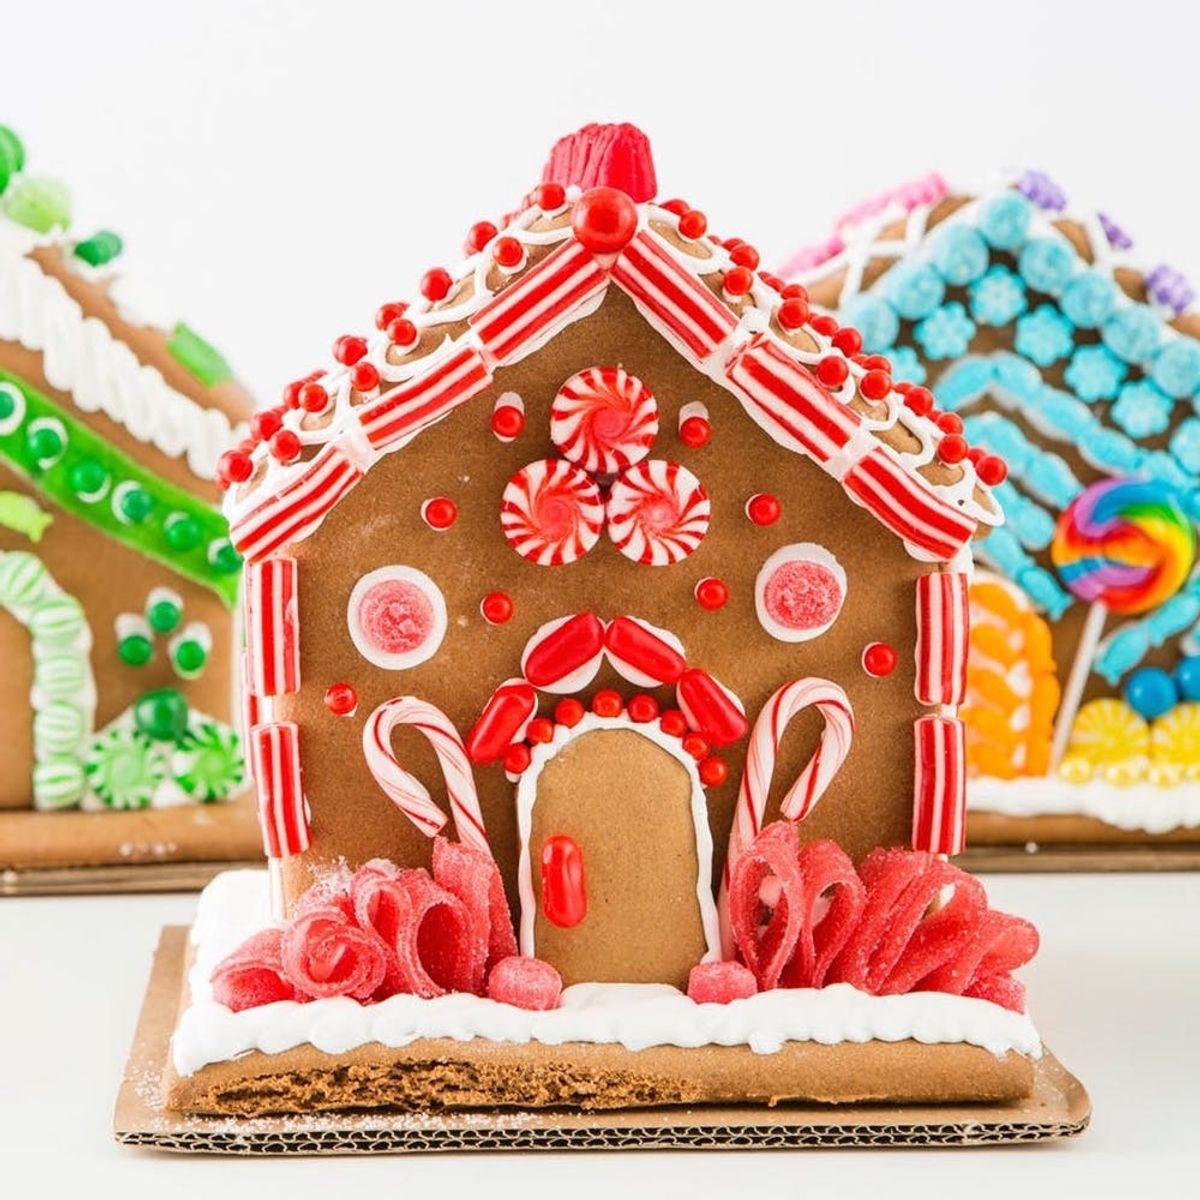 5 Must-Have Tips for Hosting a Gingerbread Decorating Party